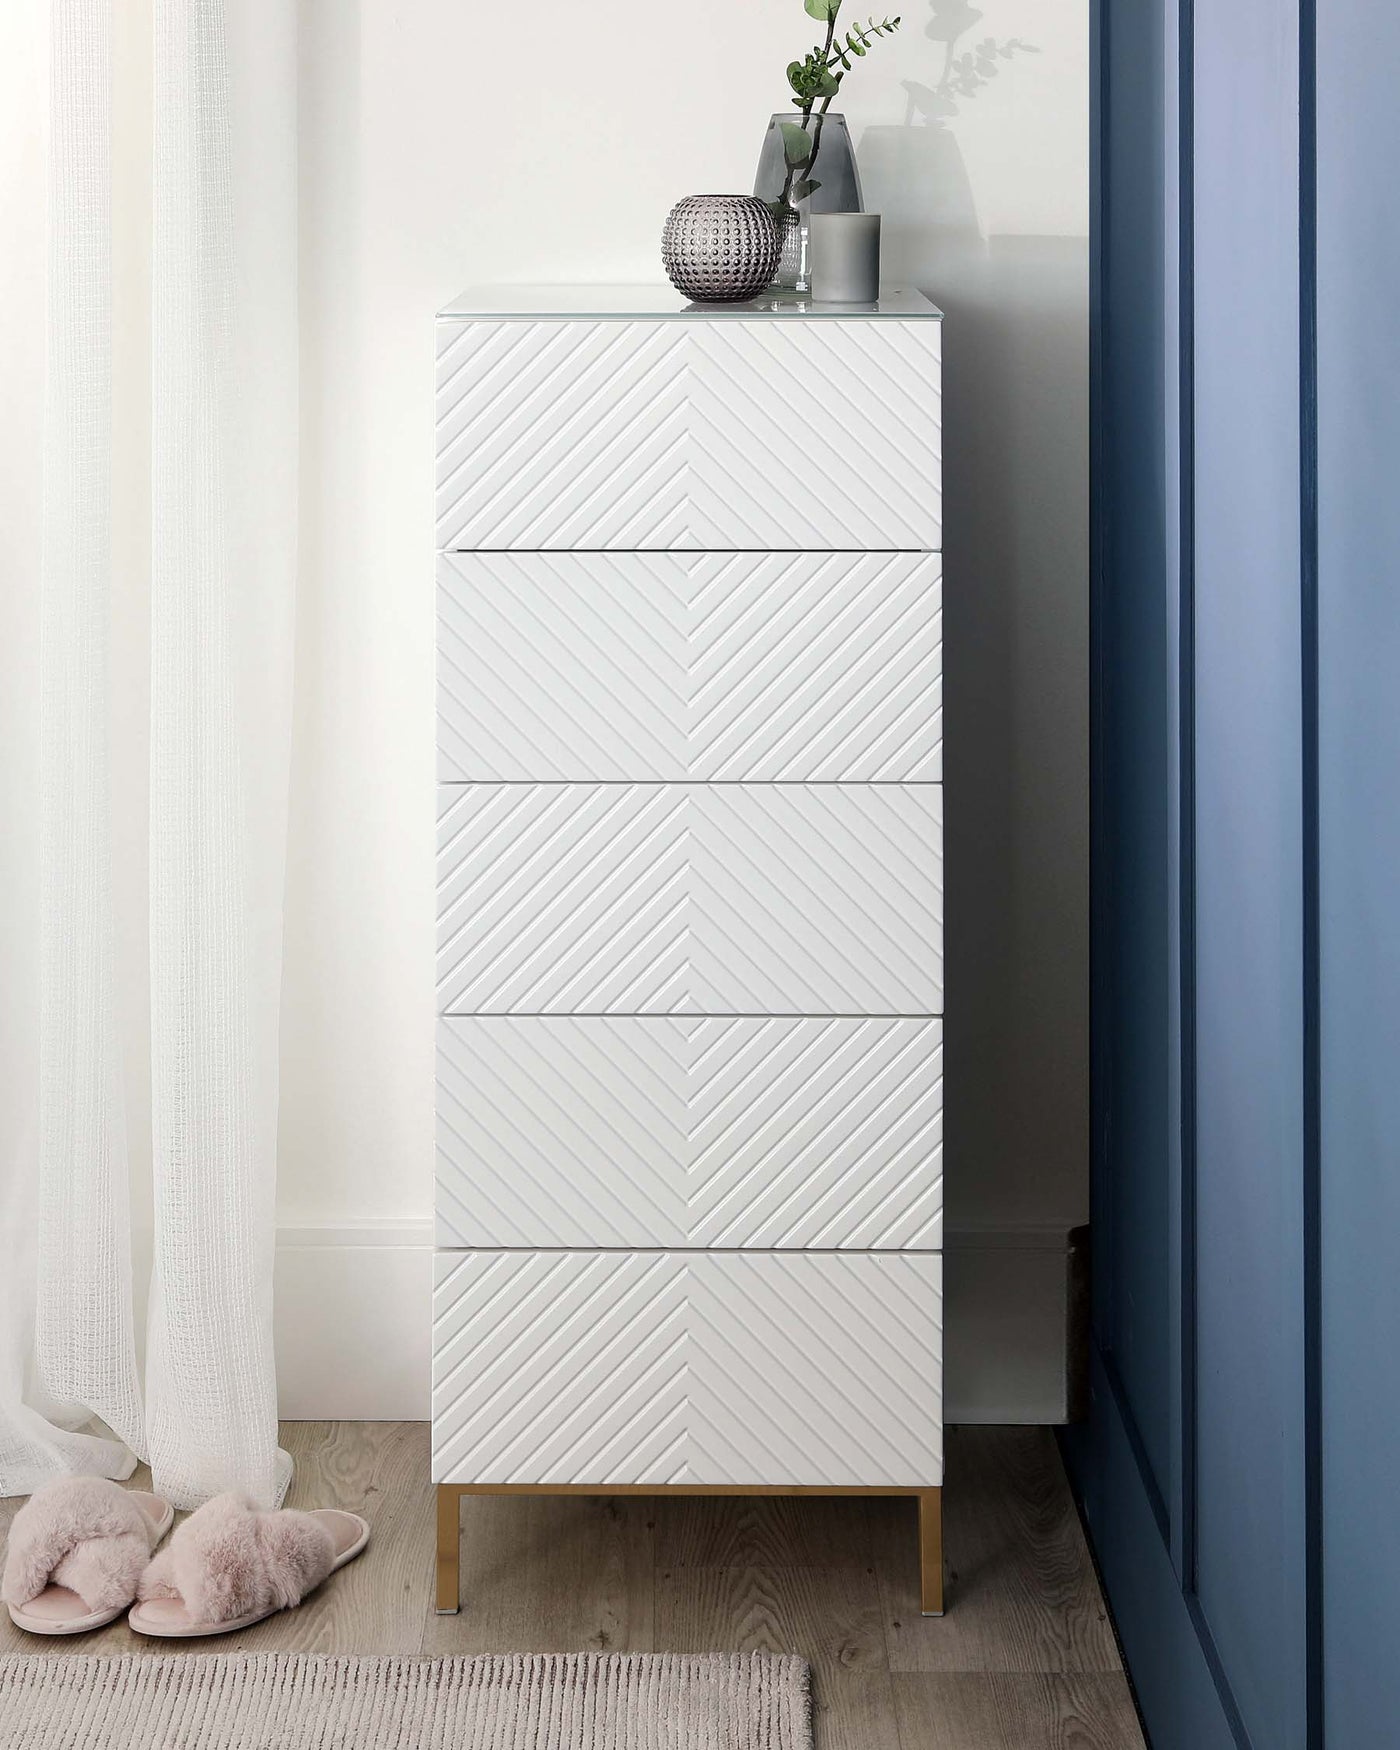 A modern white tallboy chest of drawers with a textured chevron pattern on the drawer fronts and light wooden legs. The dresser is accessorized with a decorative vase, green plant, and a textured sphere atop its smooth surface. The furniture piece stands against a light-coloured wall beside a blue curtain and a white sheer, with a cosy pair of slippers on the floor and a woven mat.